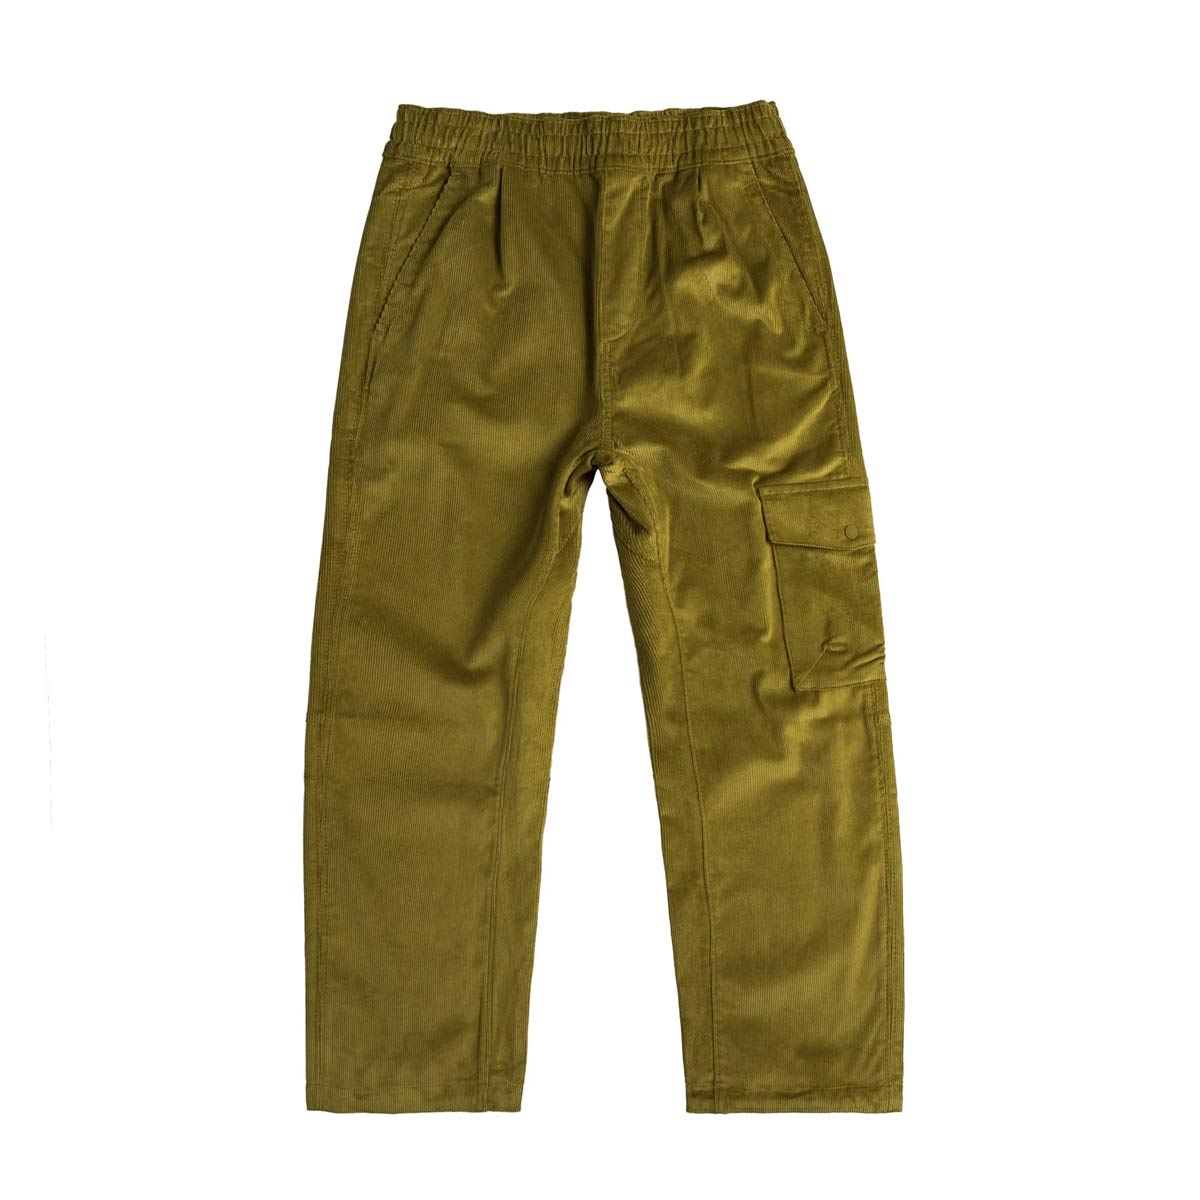 Utility cord trousers